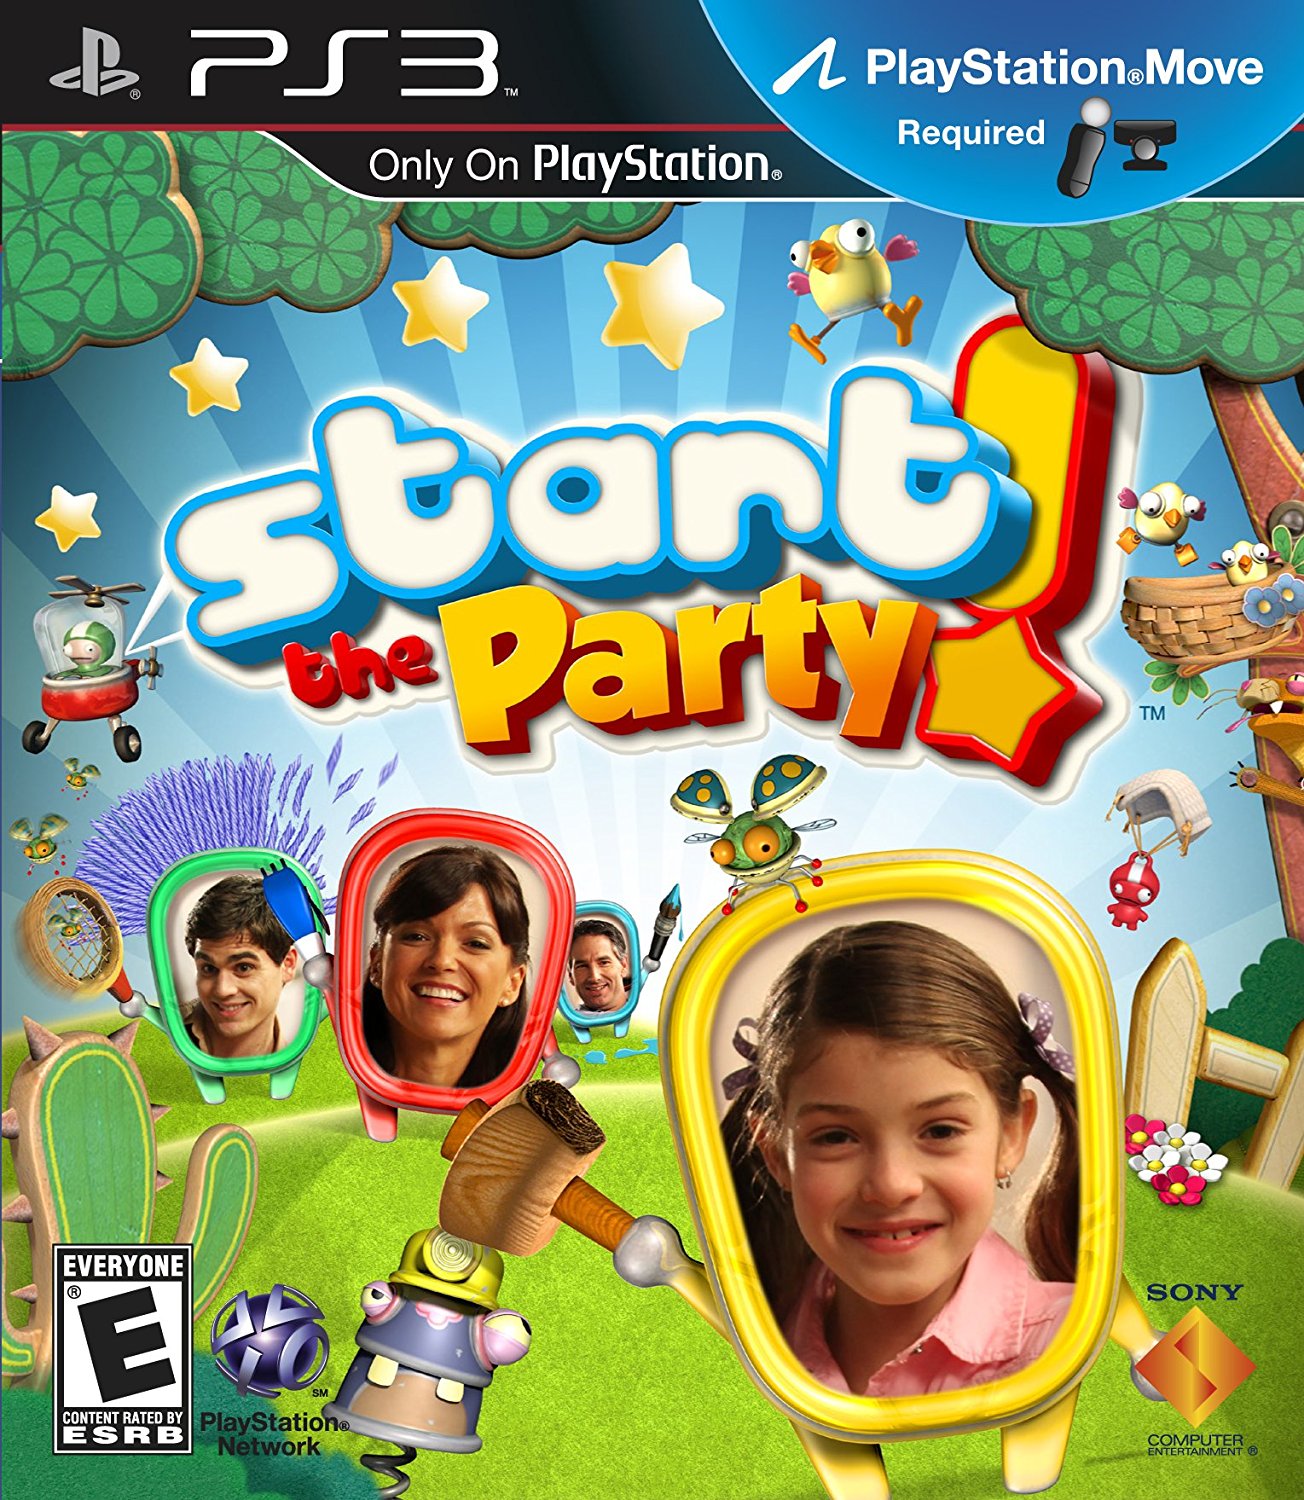 Start the party - Sony Computer Entertainment